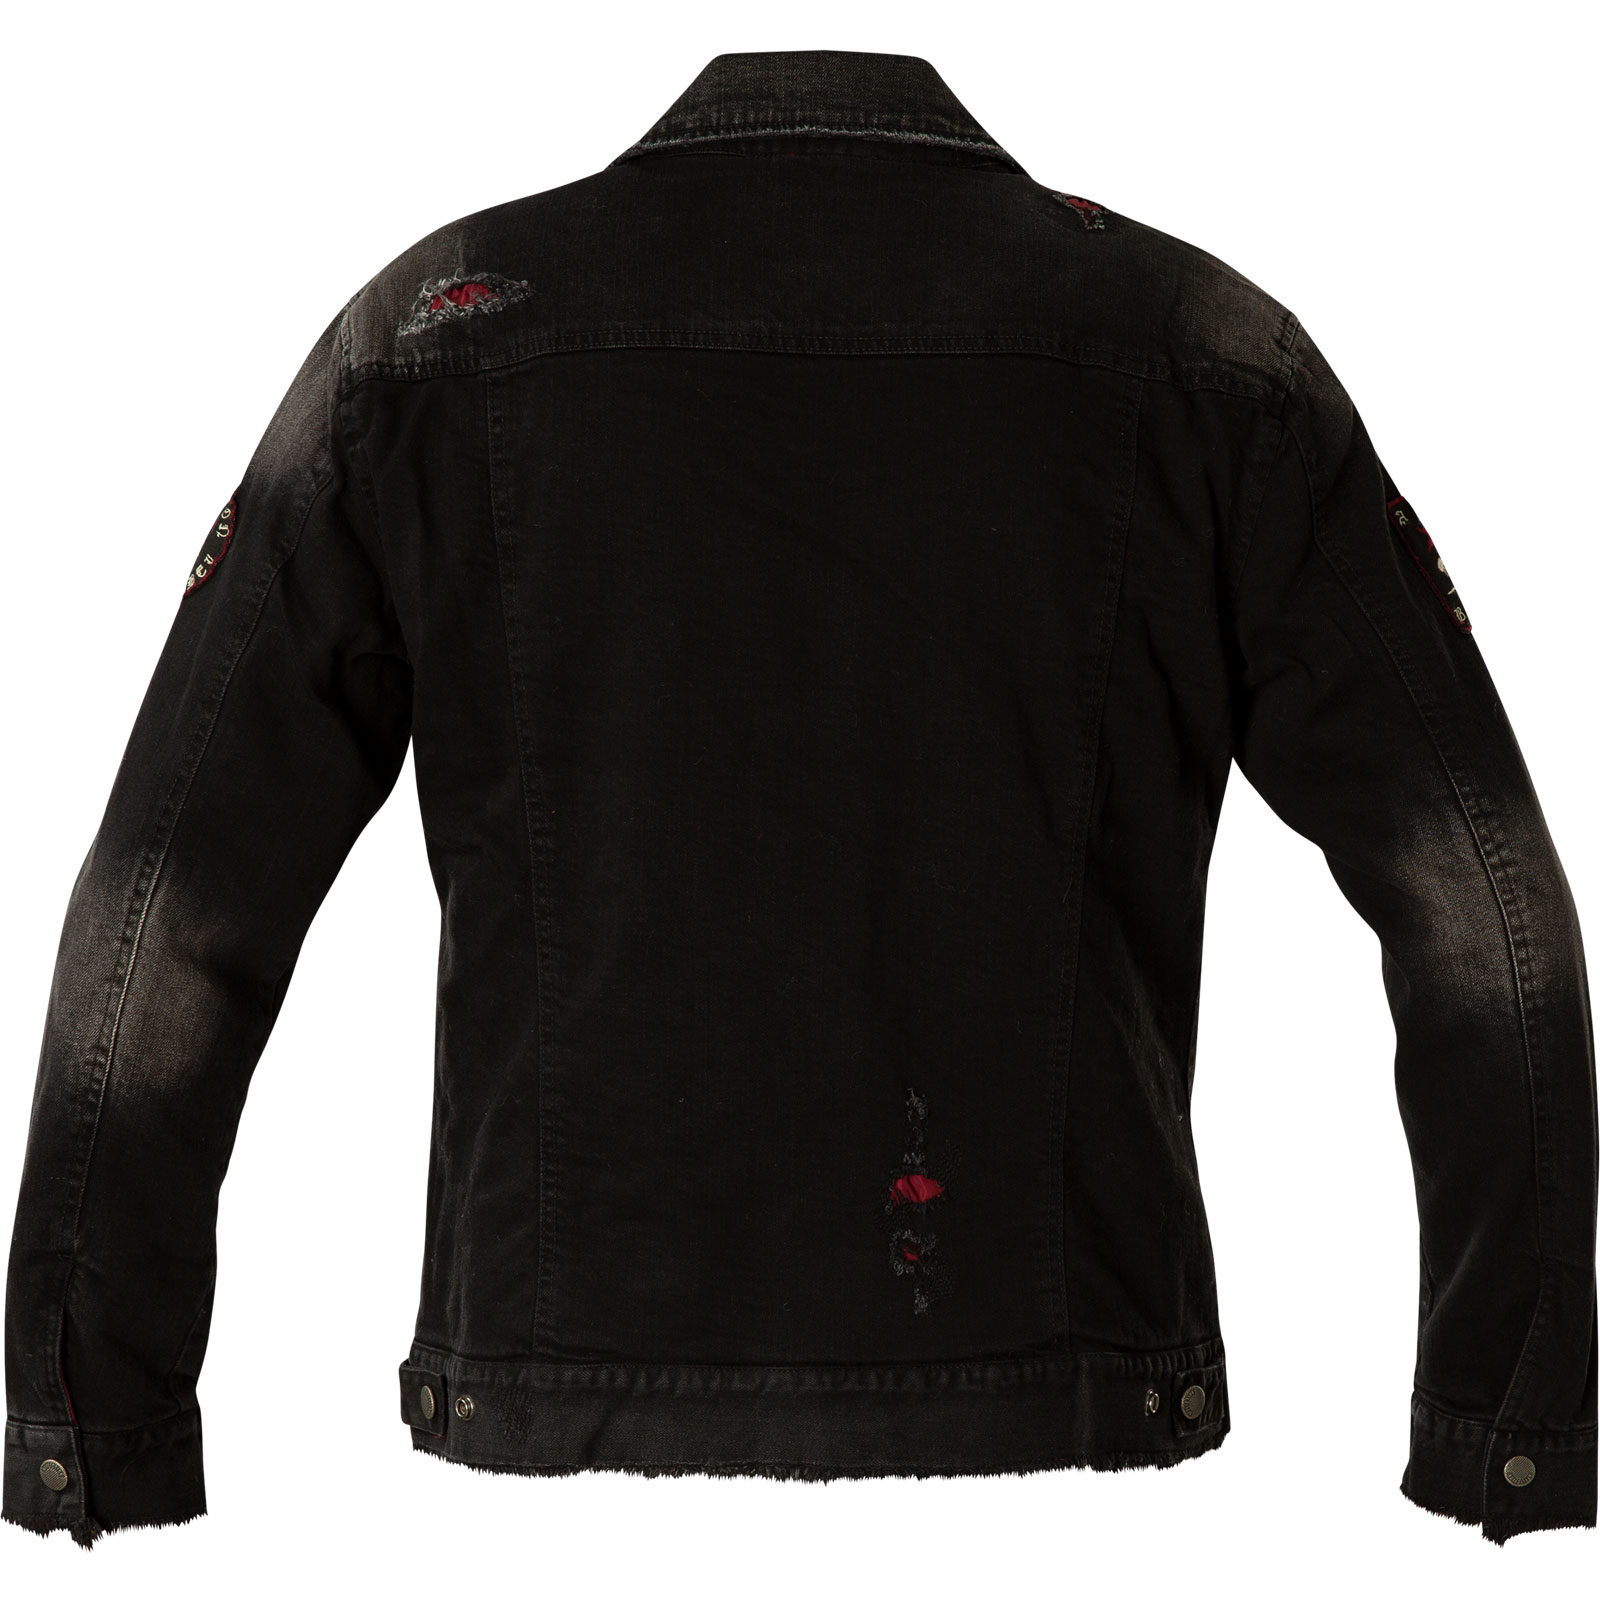 Affliction Jacket Gridlock Jacket Reversible with patches, holes and ...